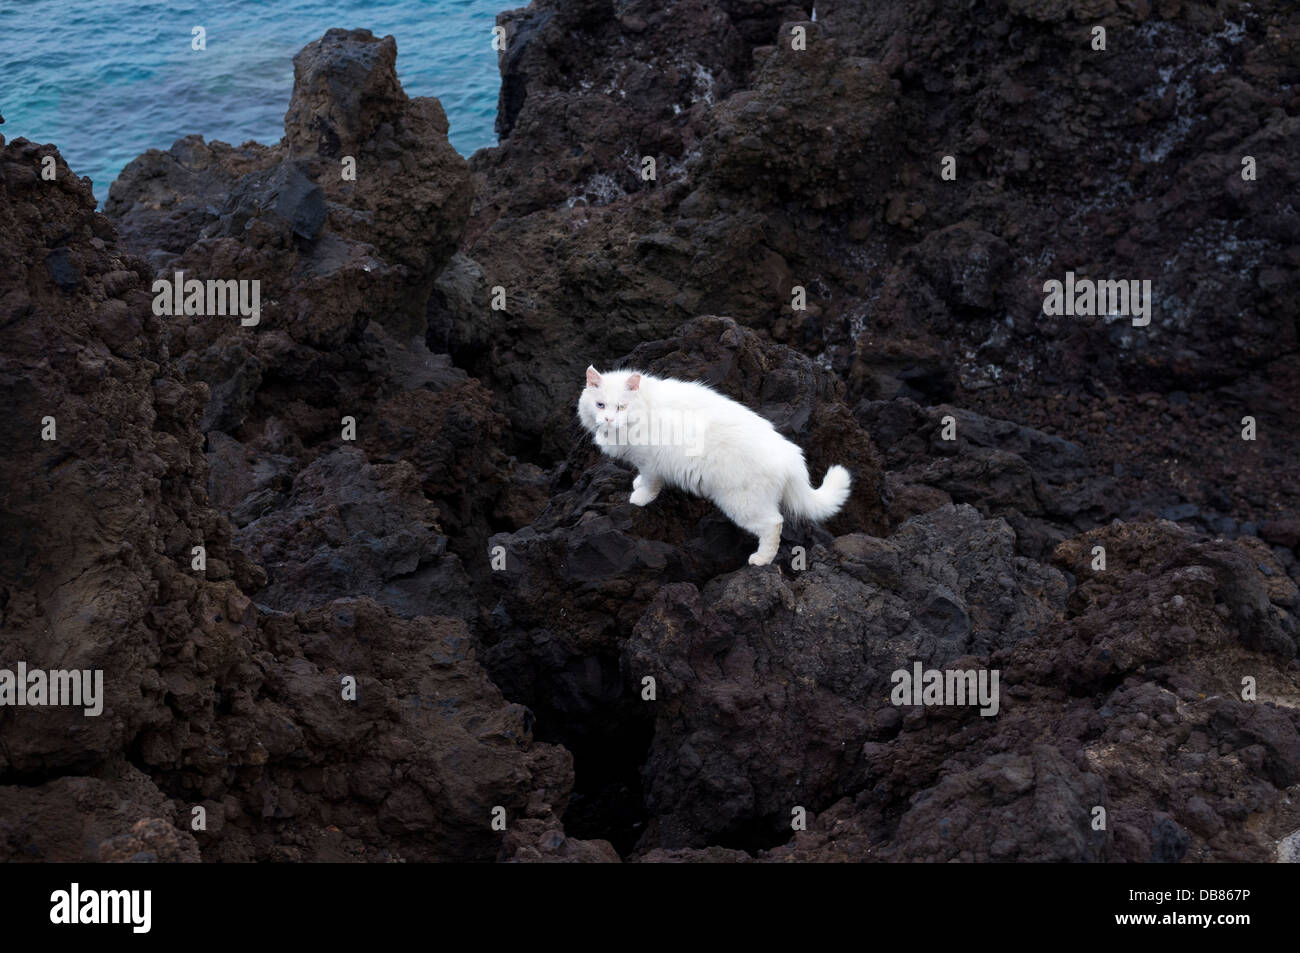 White cat with one blue eye and one brown eye on black volcanic rocks by the sea at Playa San Juan, tenerife, canary Islands, Stock Photo